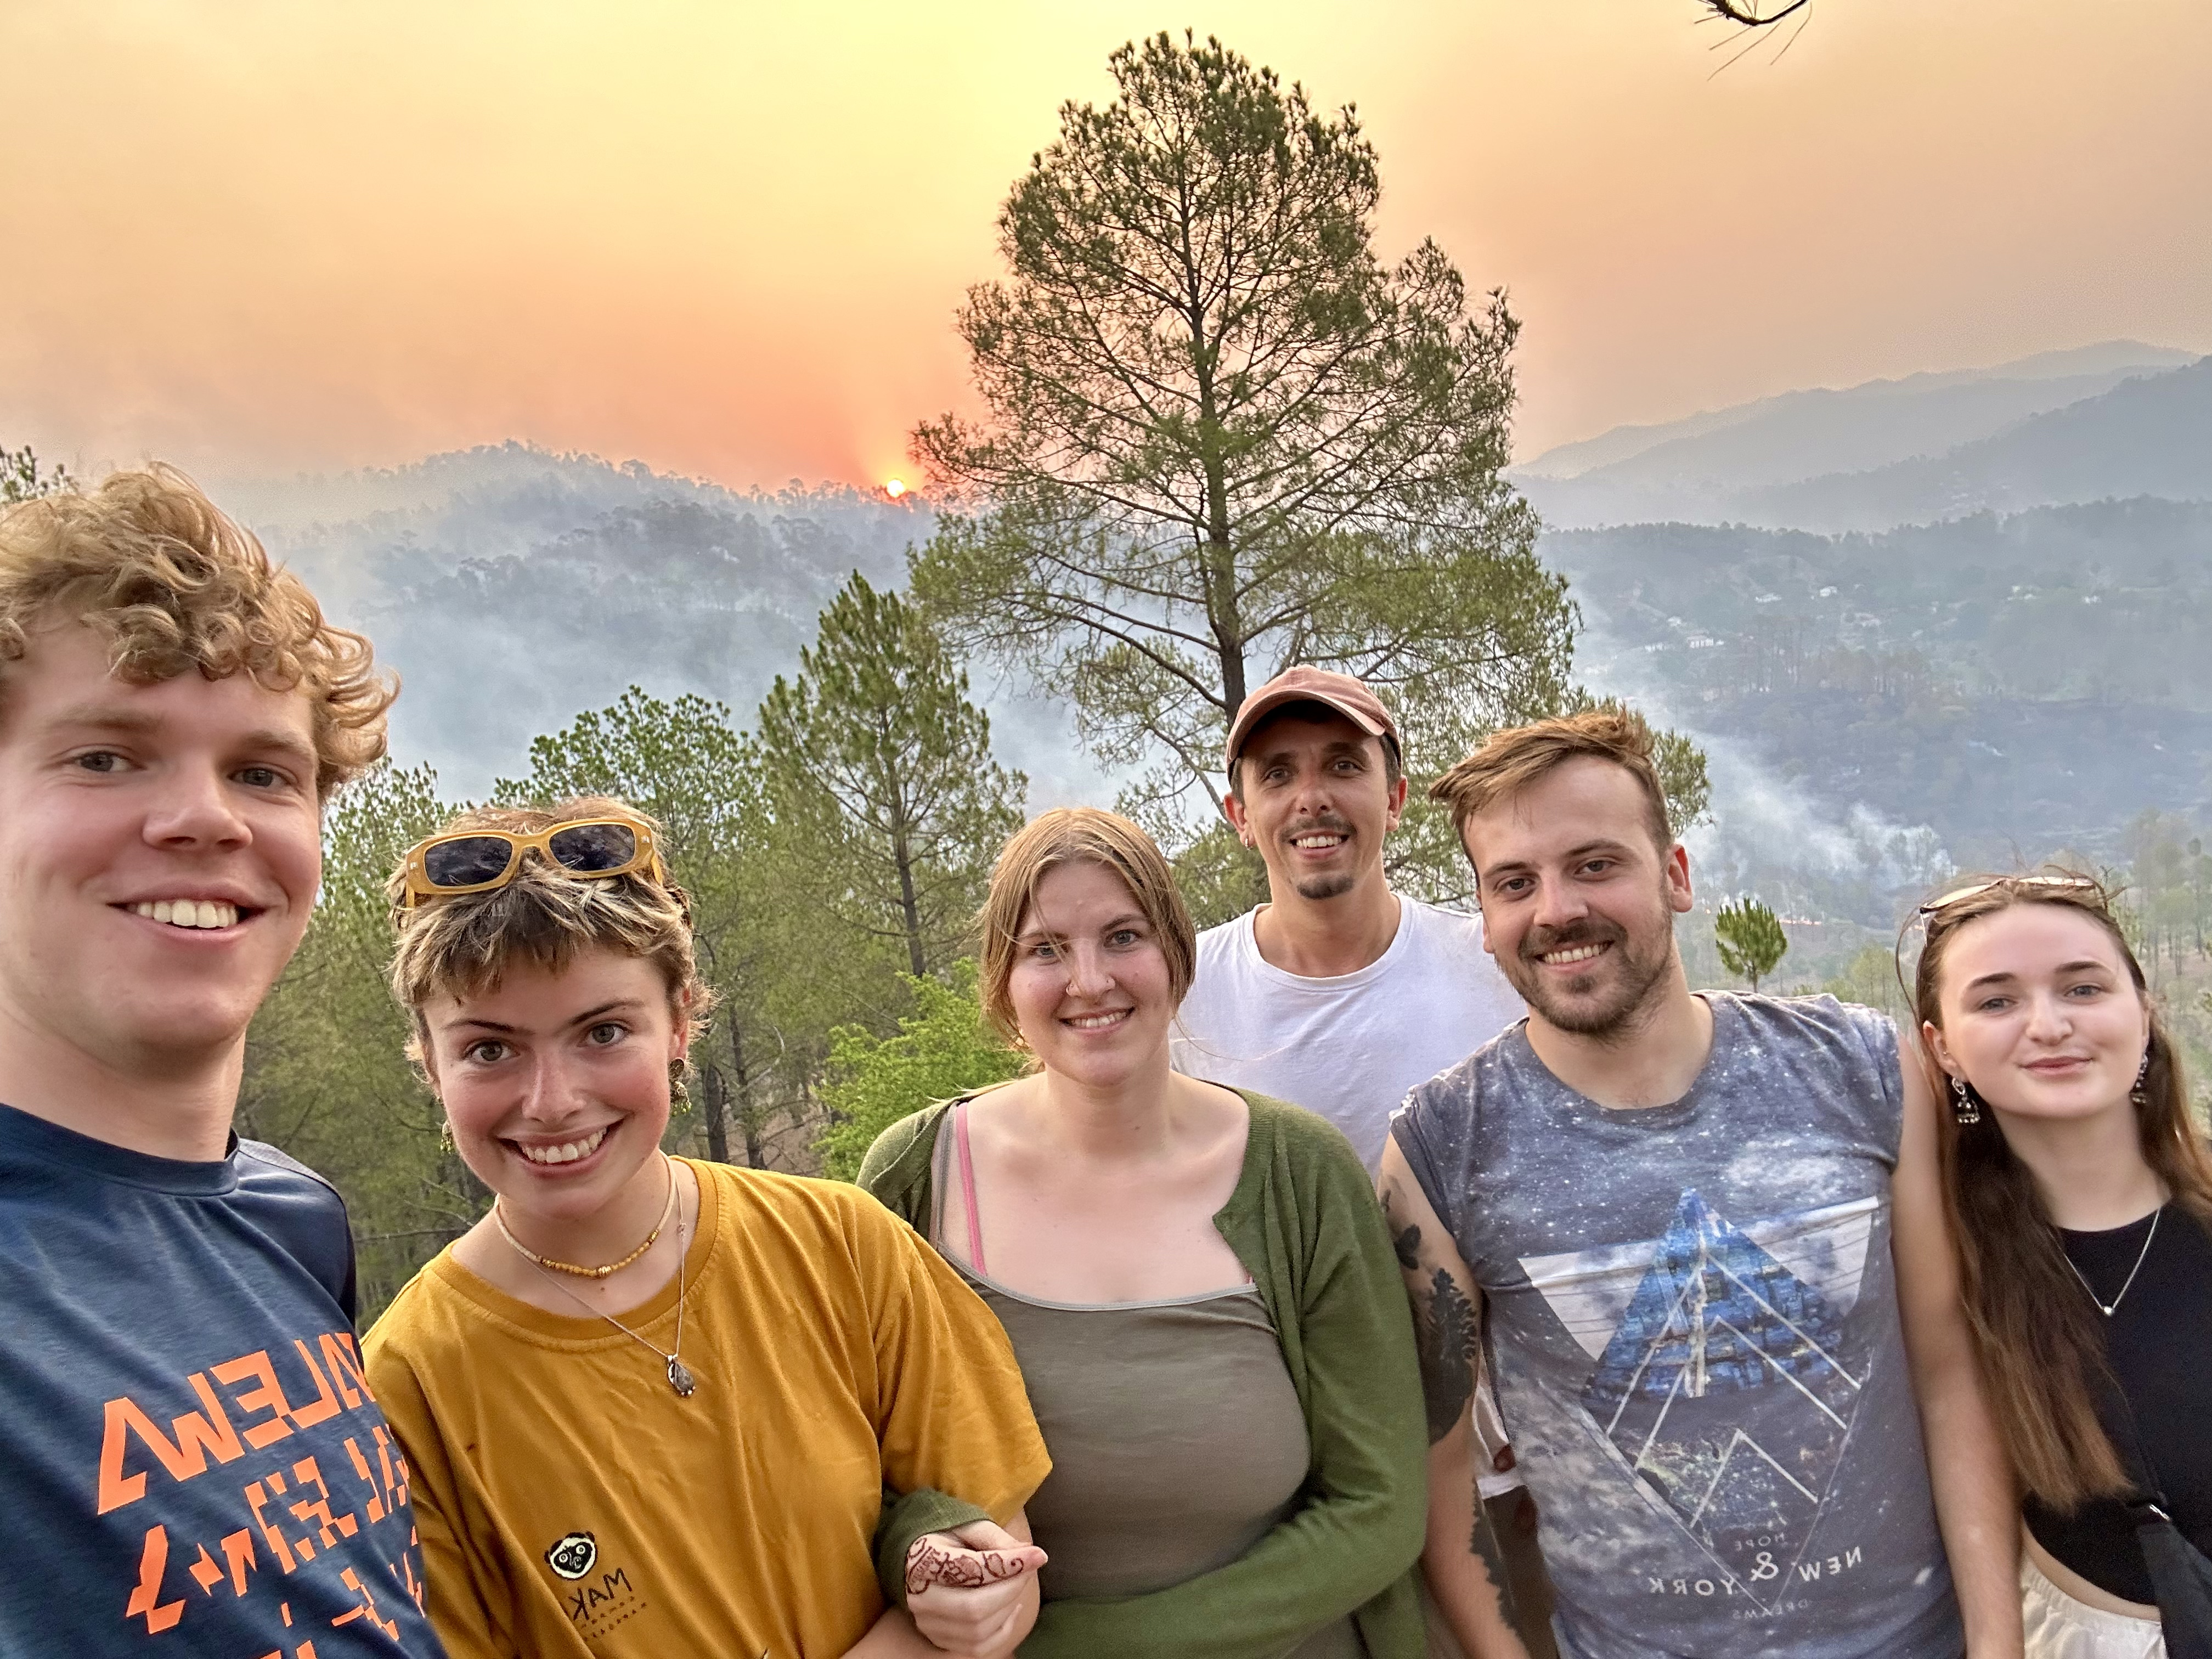 Group of young people smiling with sun setting over mountains in the background